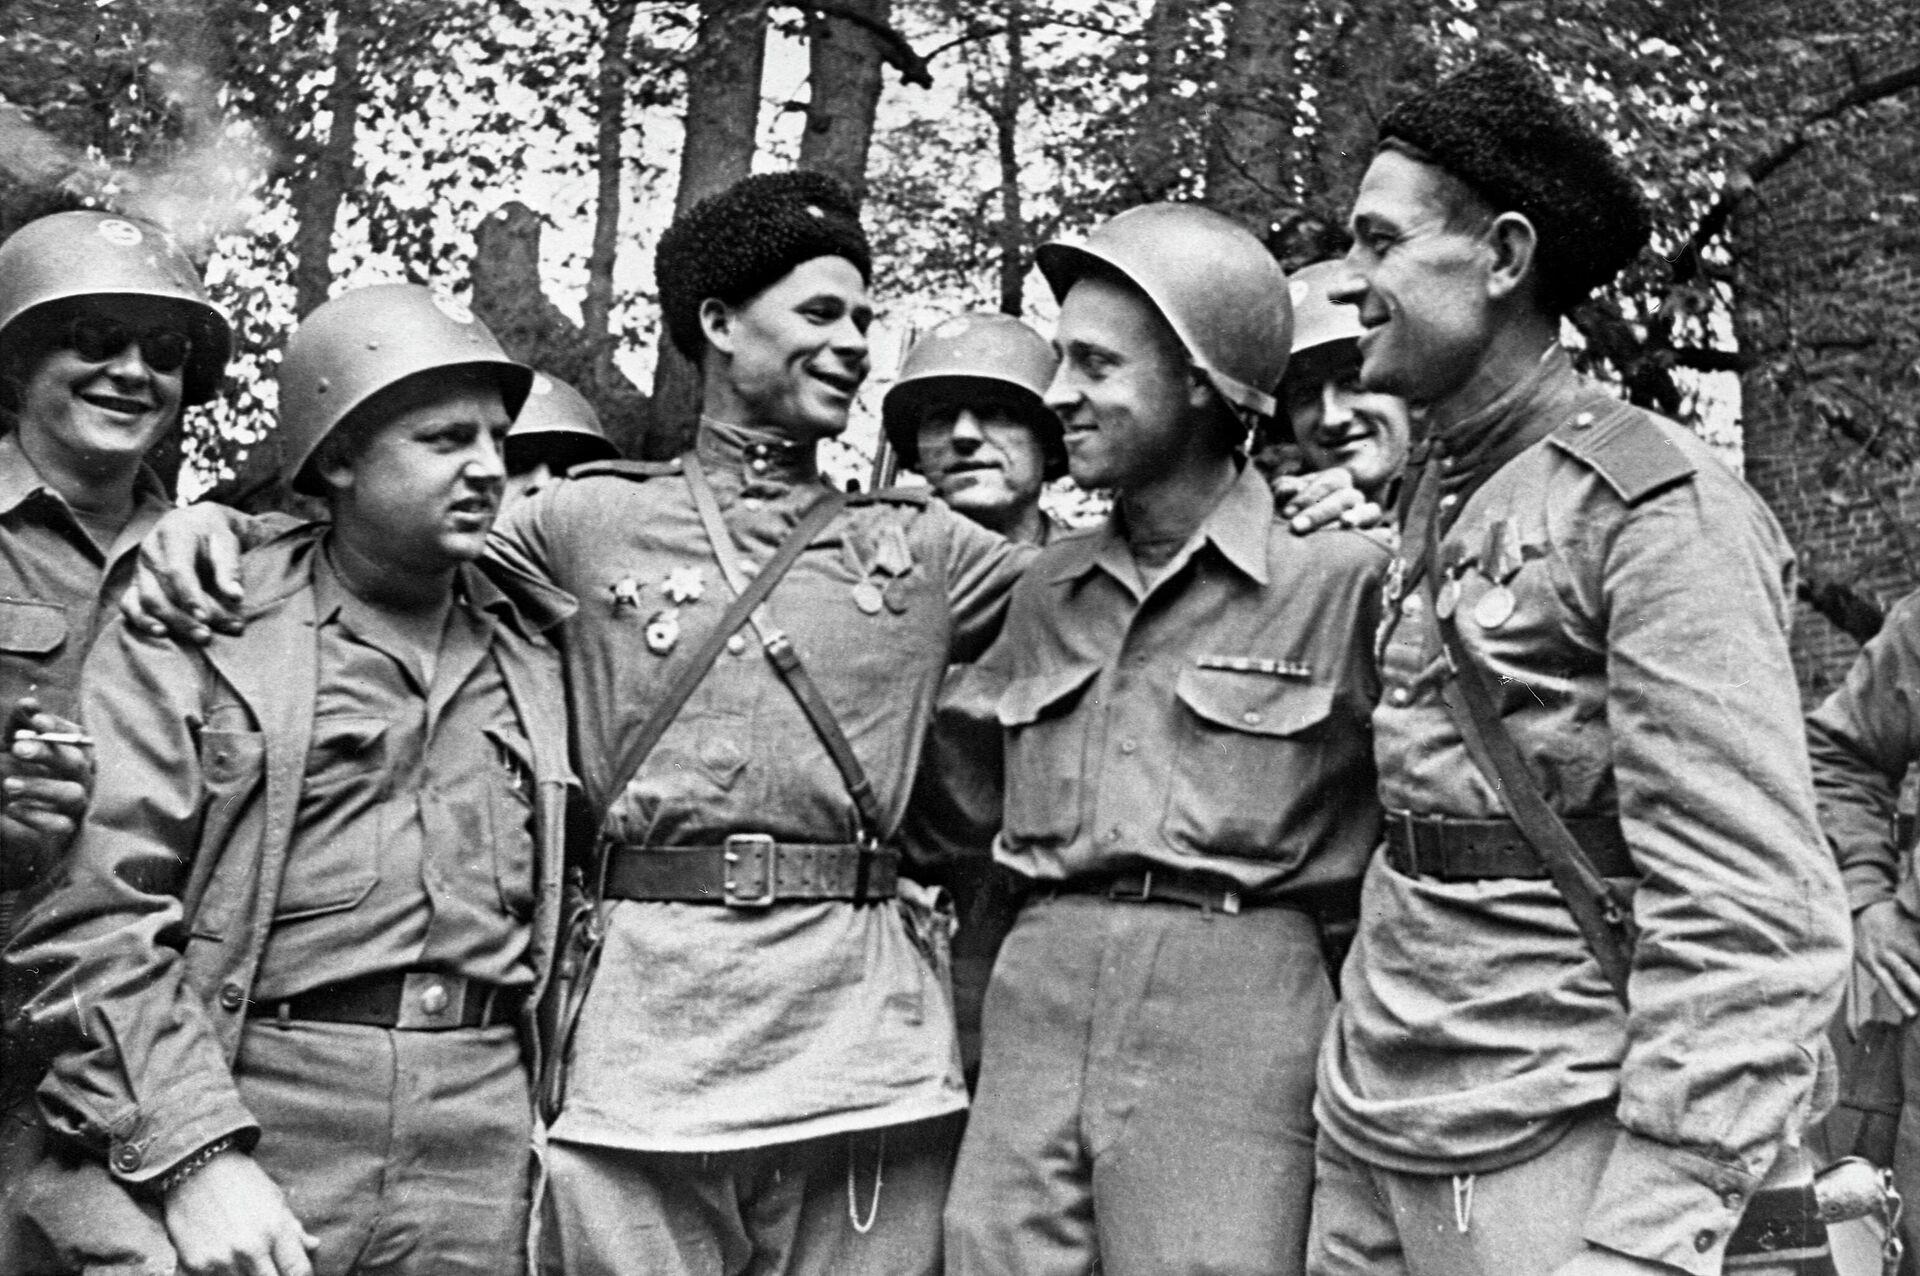 Meeting of American and Soviet soldiers on April 25, 1945 near the city of Torgau. - Sputnik International, 1920, 31.12.2022